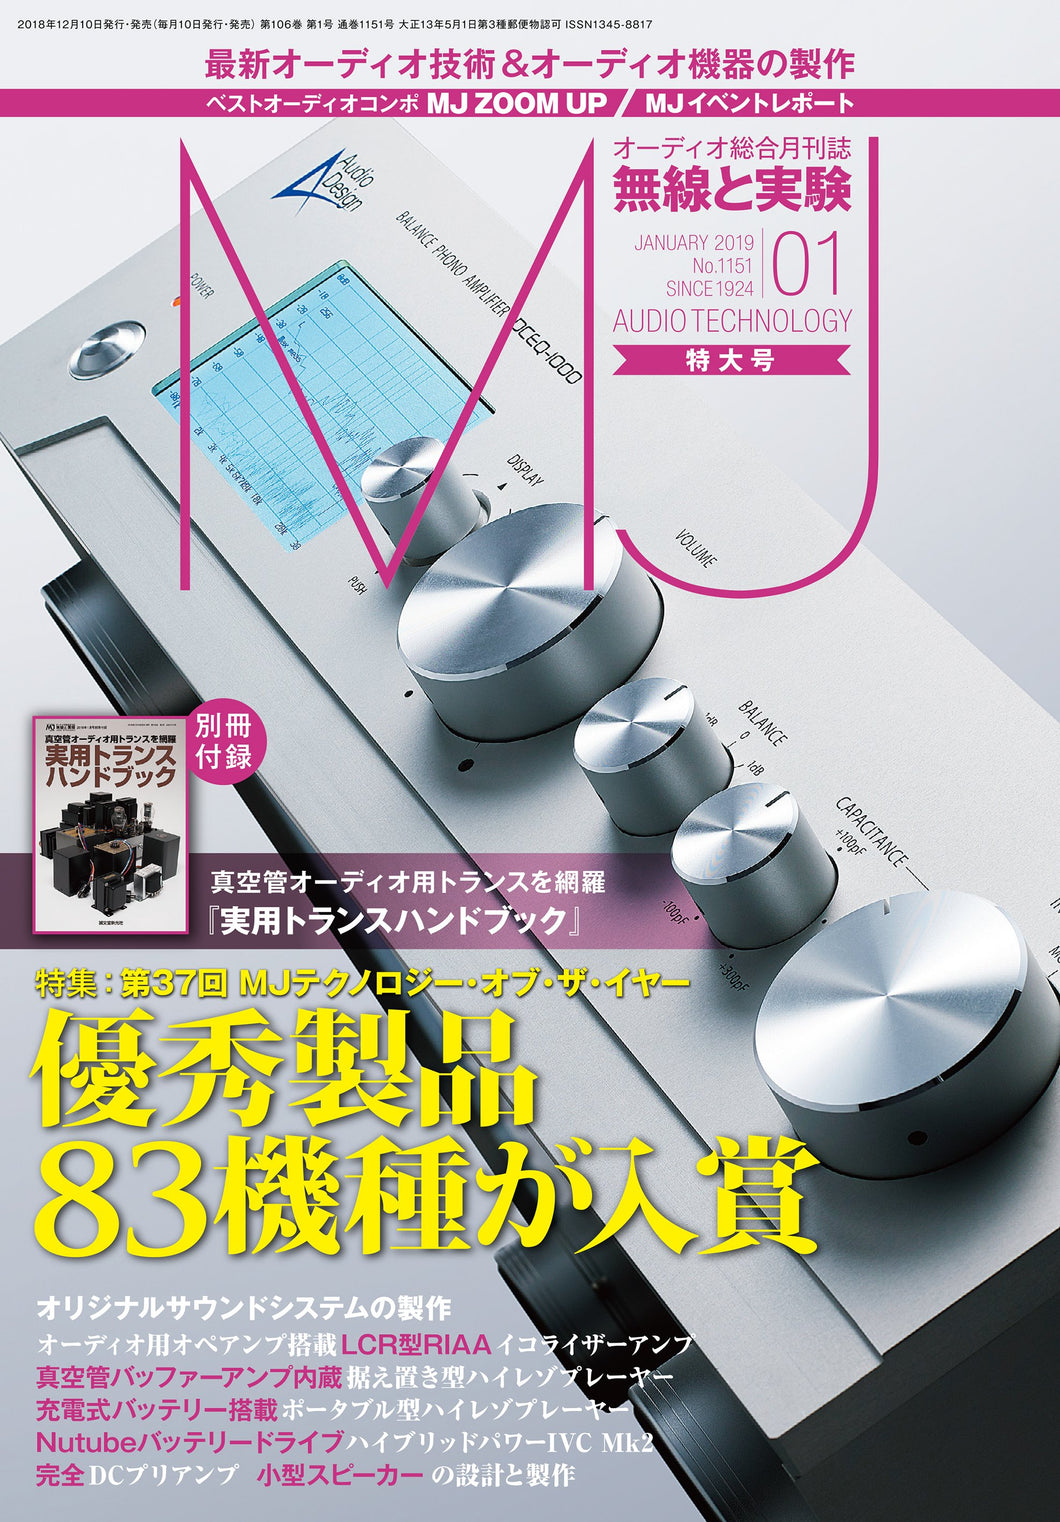 MJ Radio and Experiment January 2019 issue <Extra-large issue with appendix>